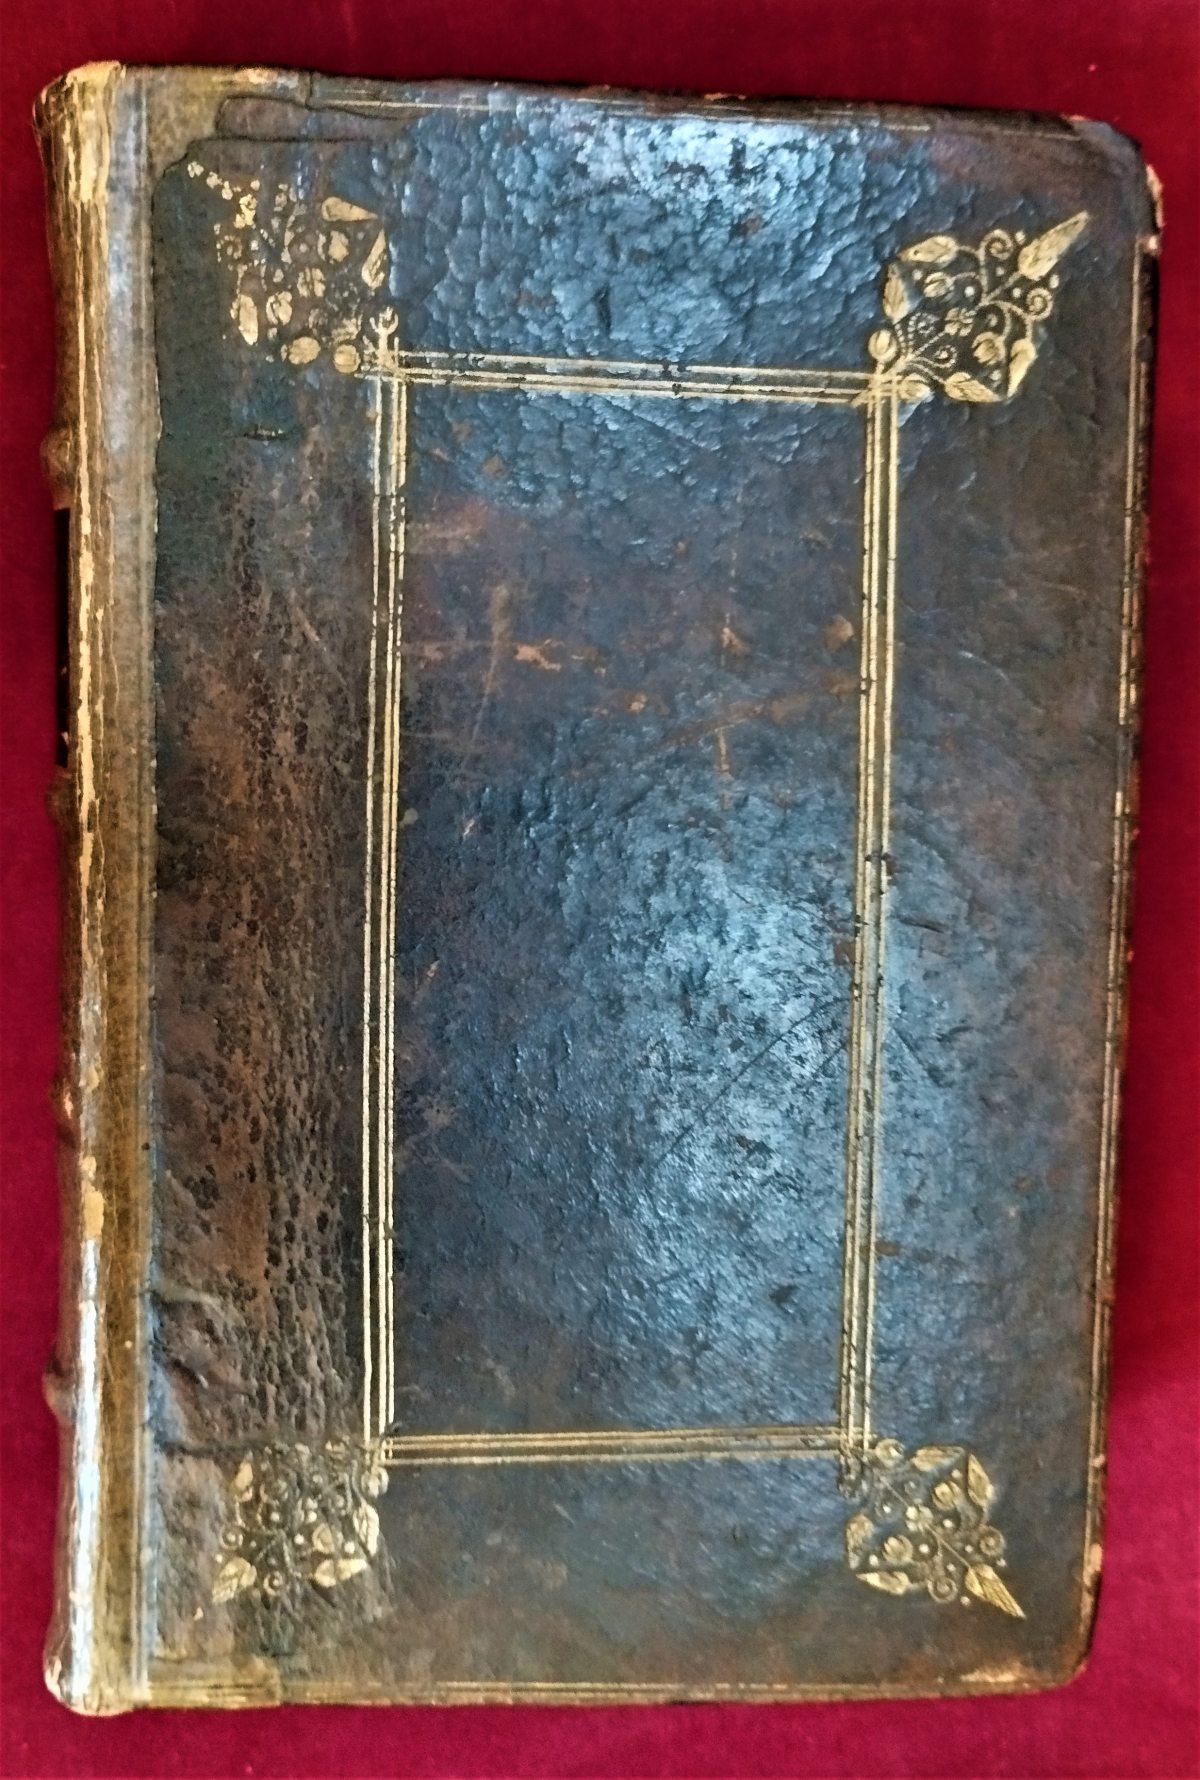 Picture of the external binding of the volume that contains Caius works. Full calf, border (double gold fillets), frame (triple gold fillets with ornaments at angles).